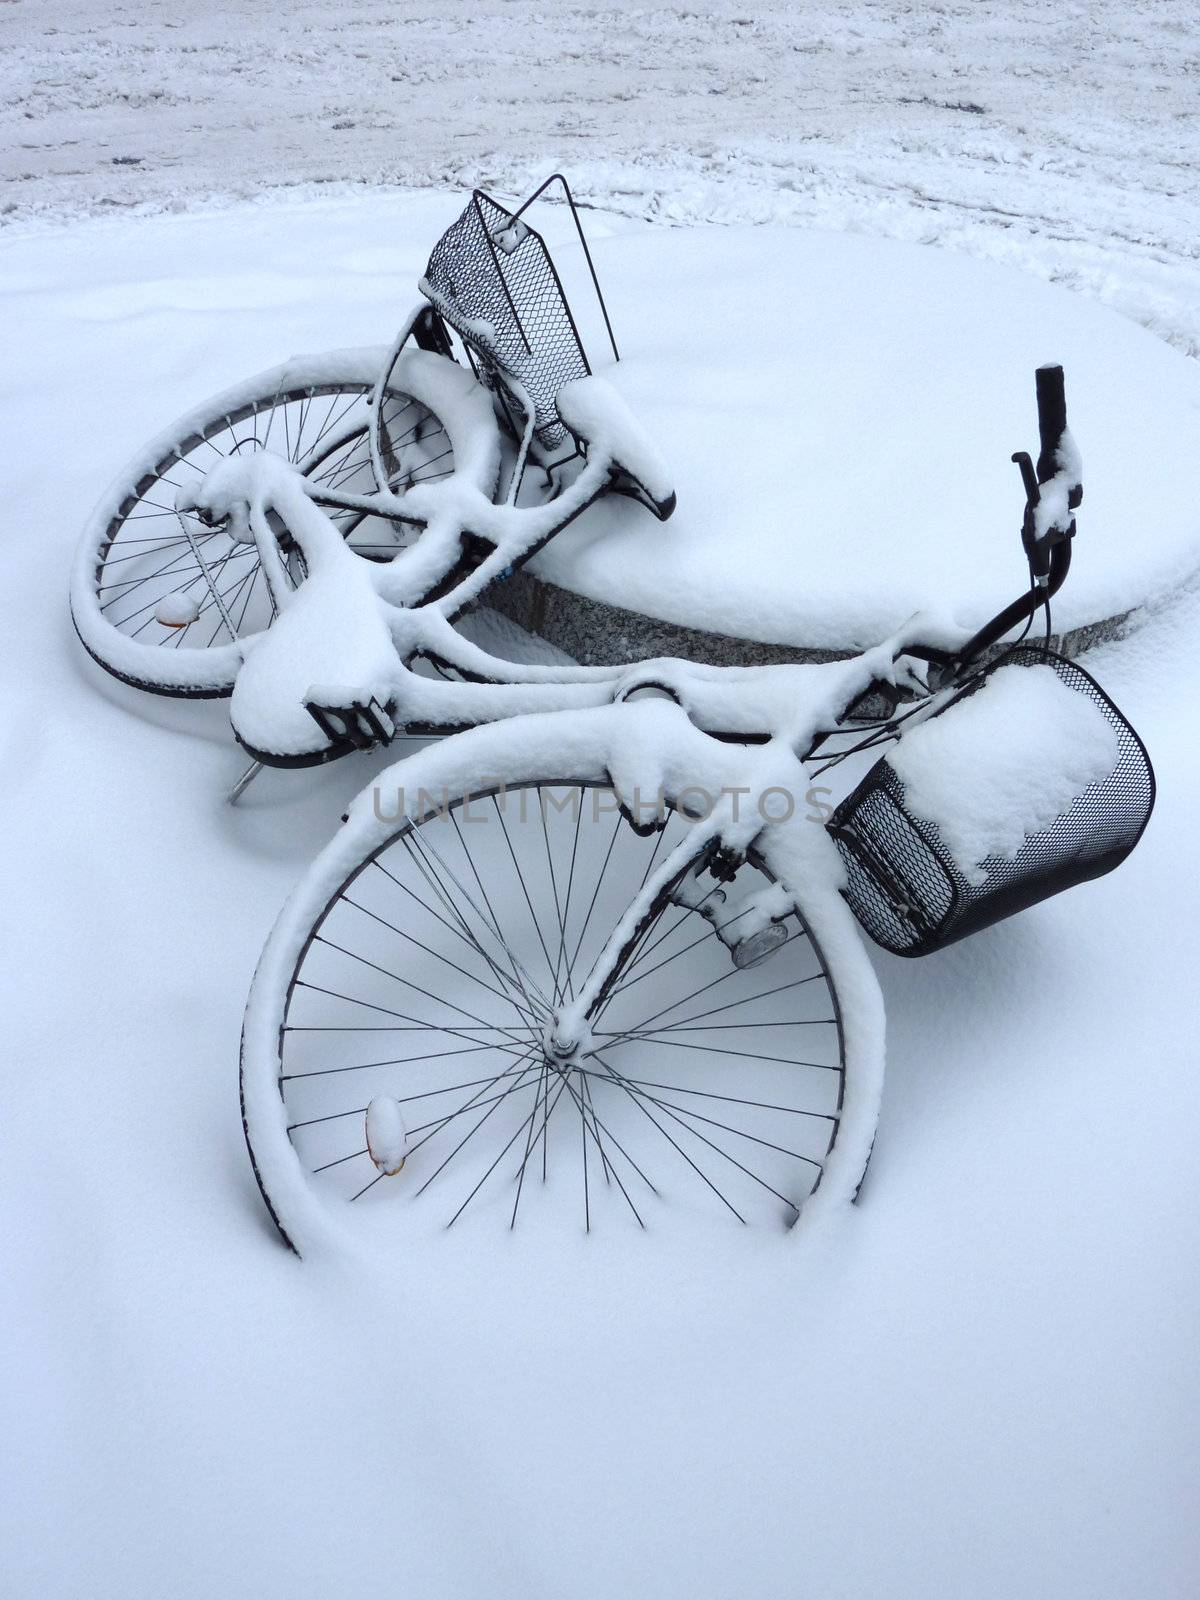 Fallen bicycle covered by snow during winter